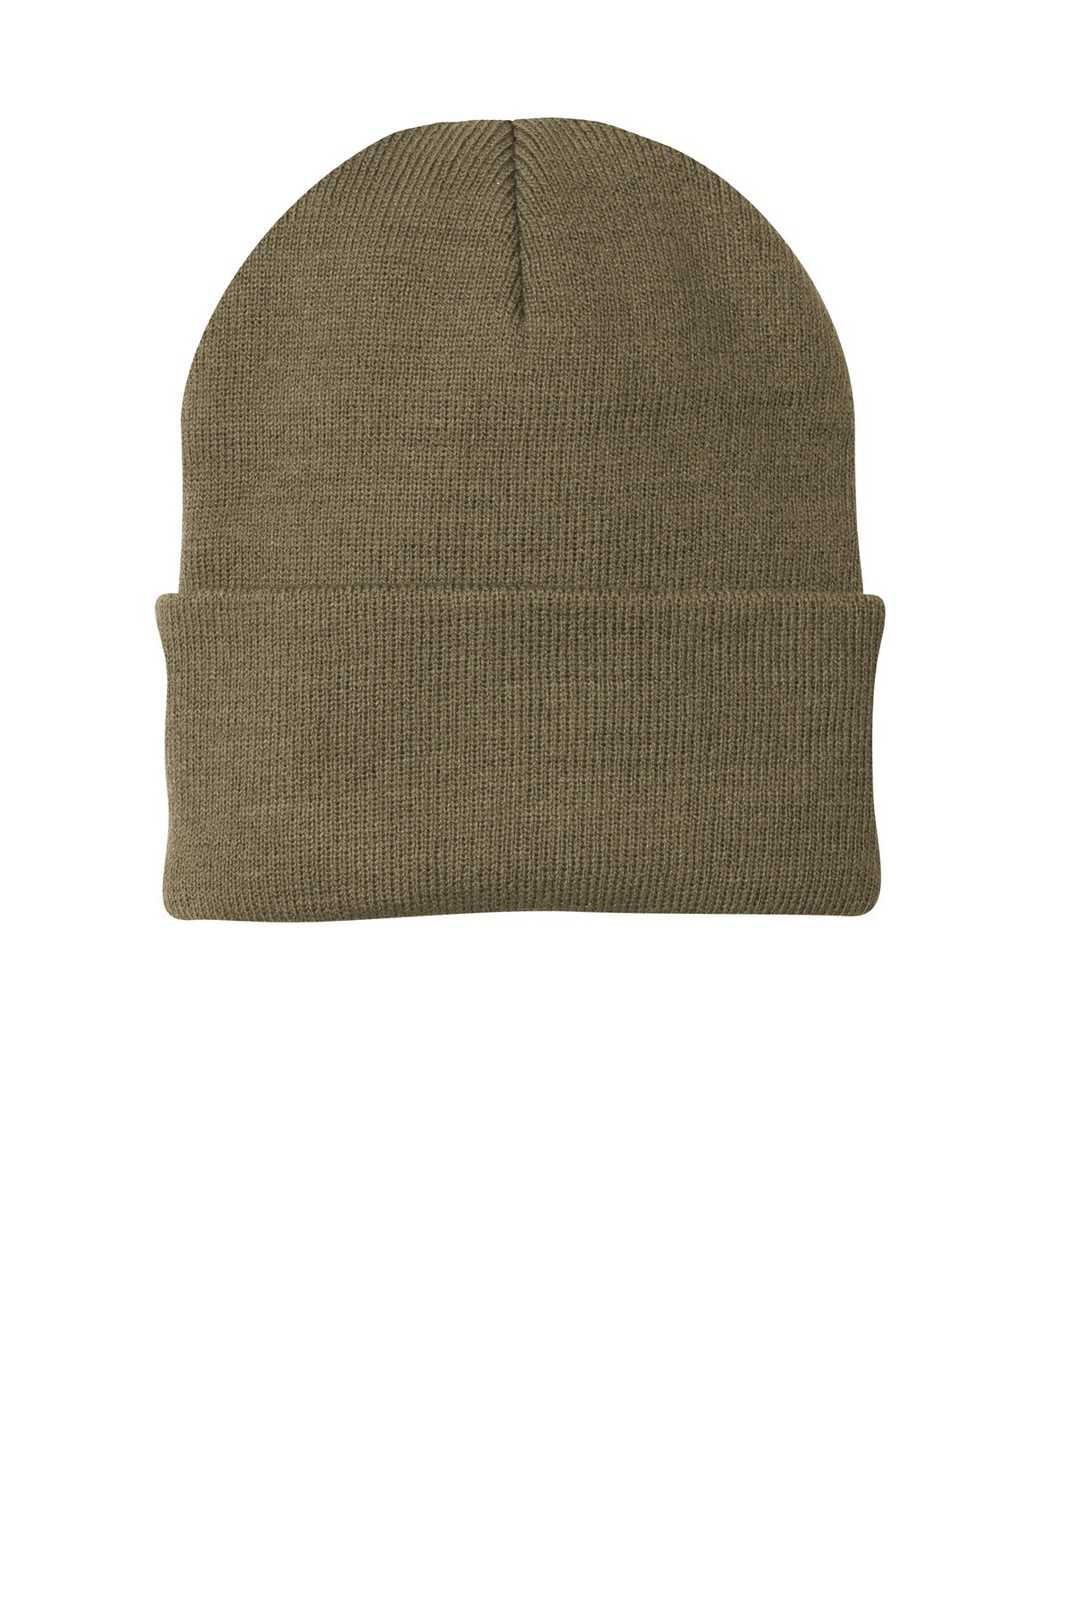 Port & Company CP90 Knit Cap - Coyote Brown - HIT a Double - 1